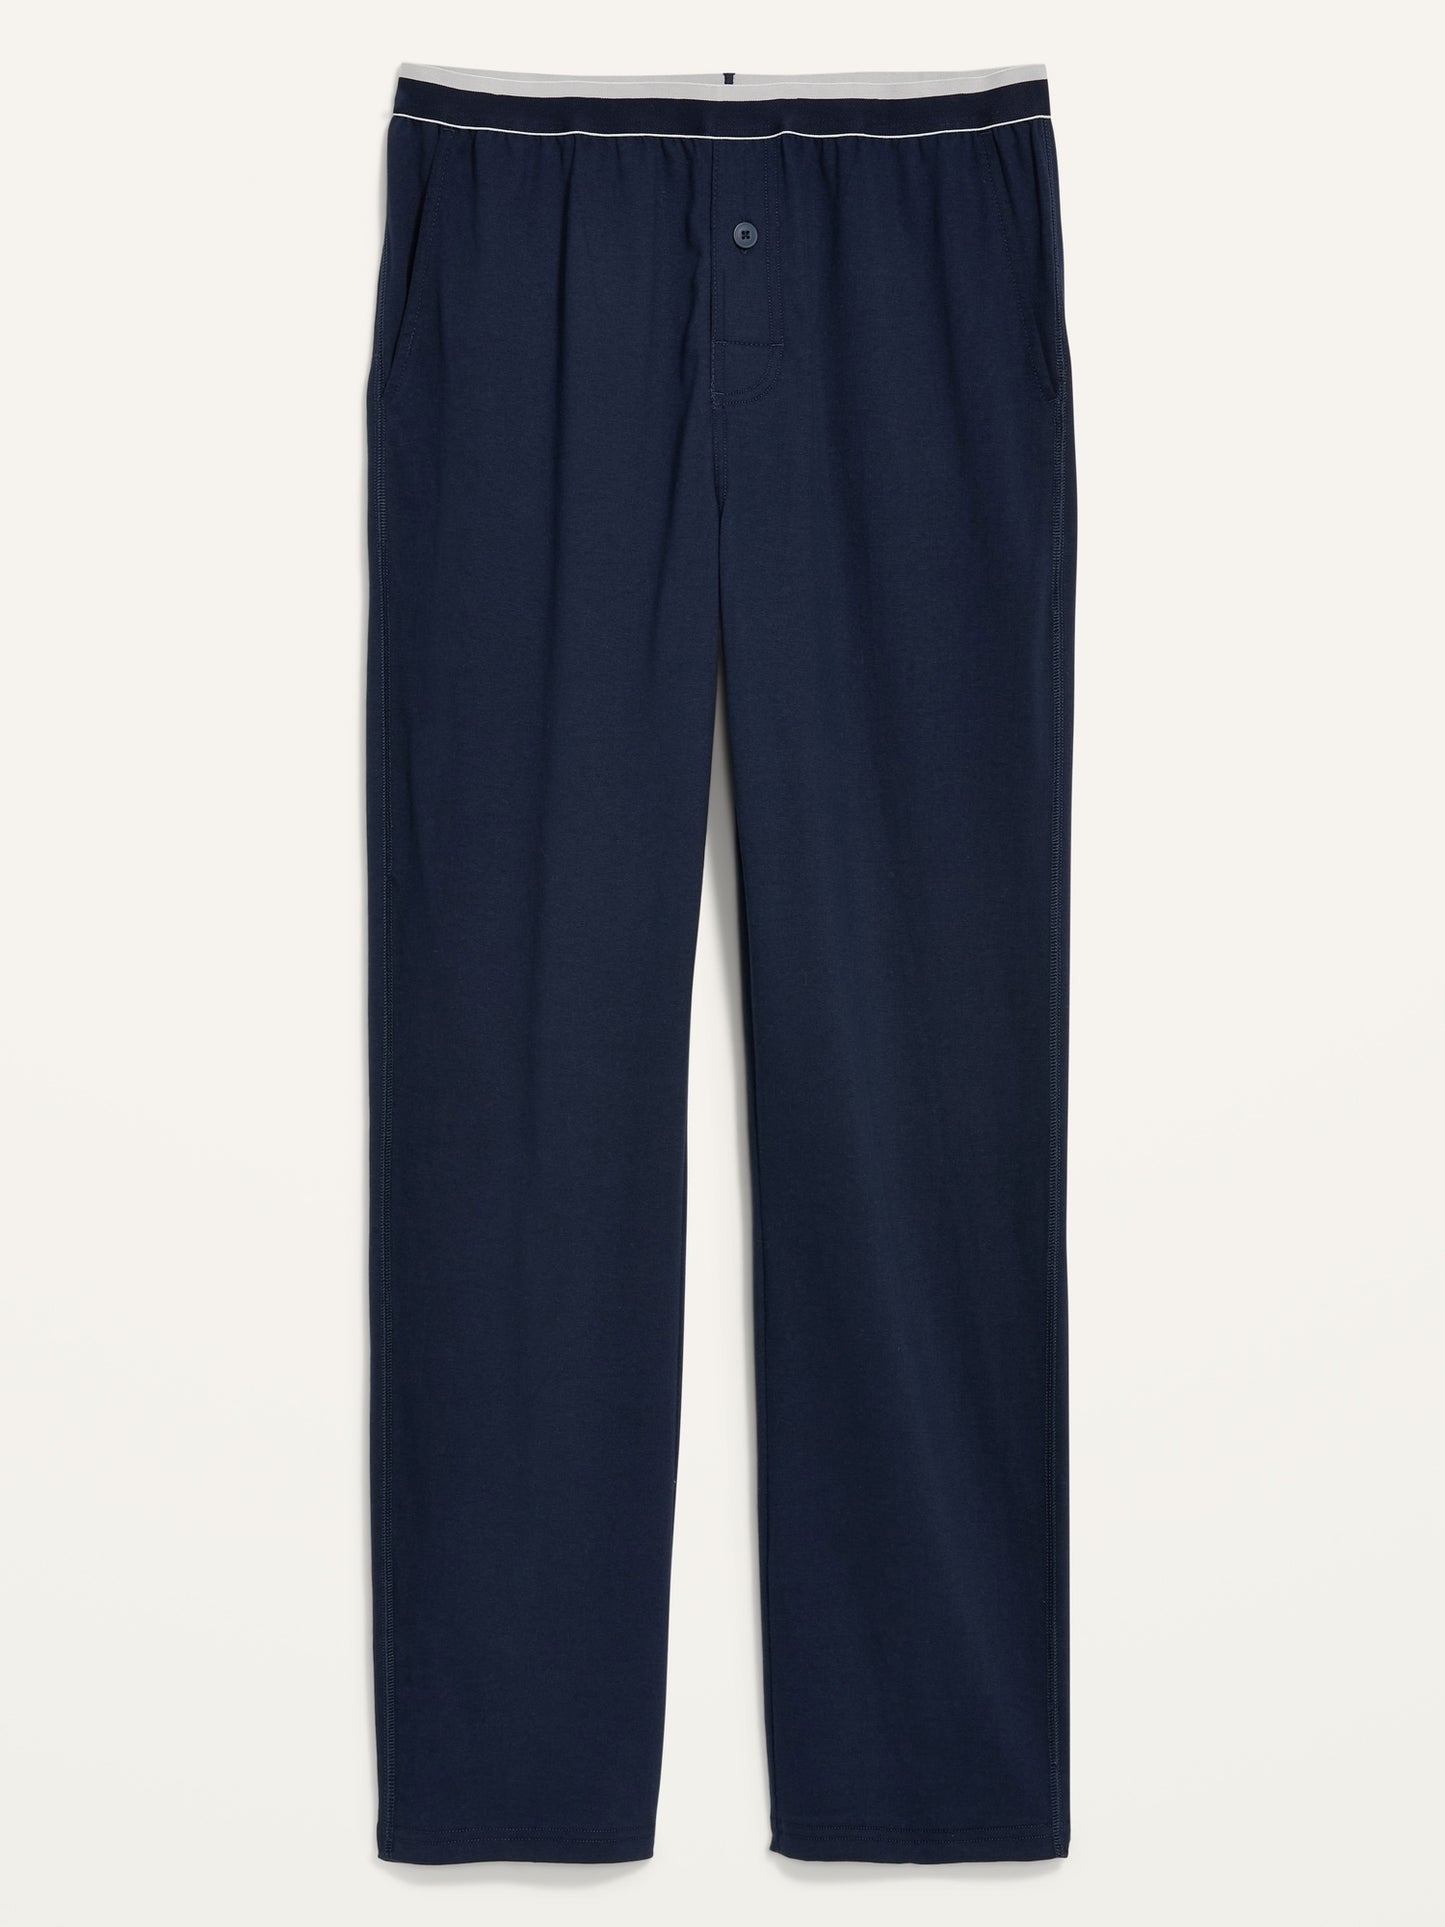 ON Jersey Lounge Pants For Men - Navy